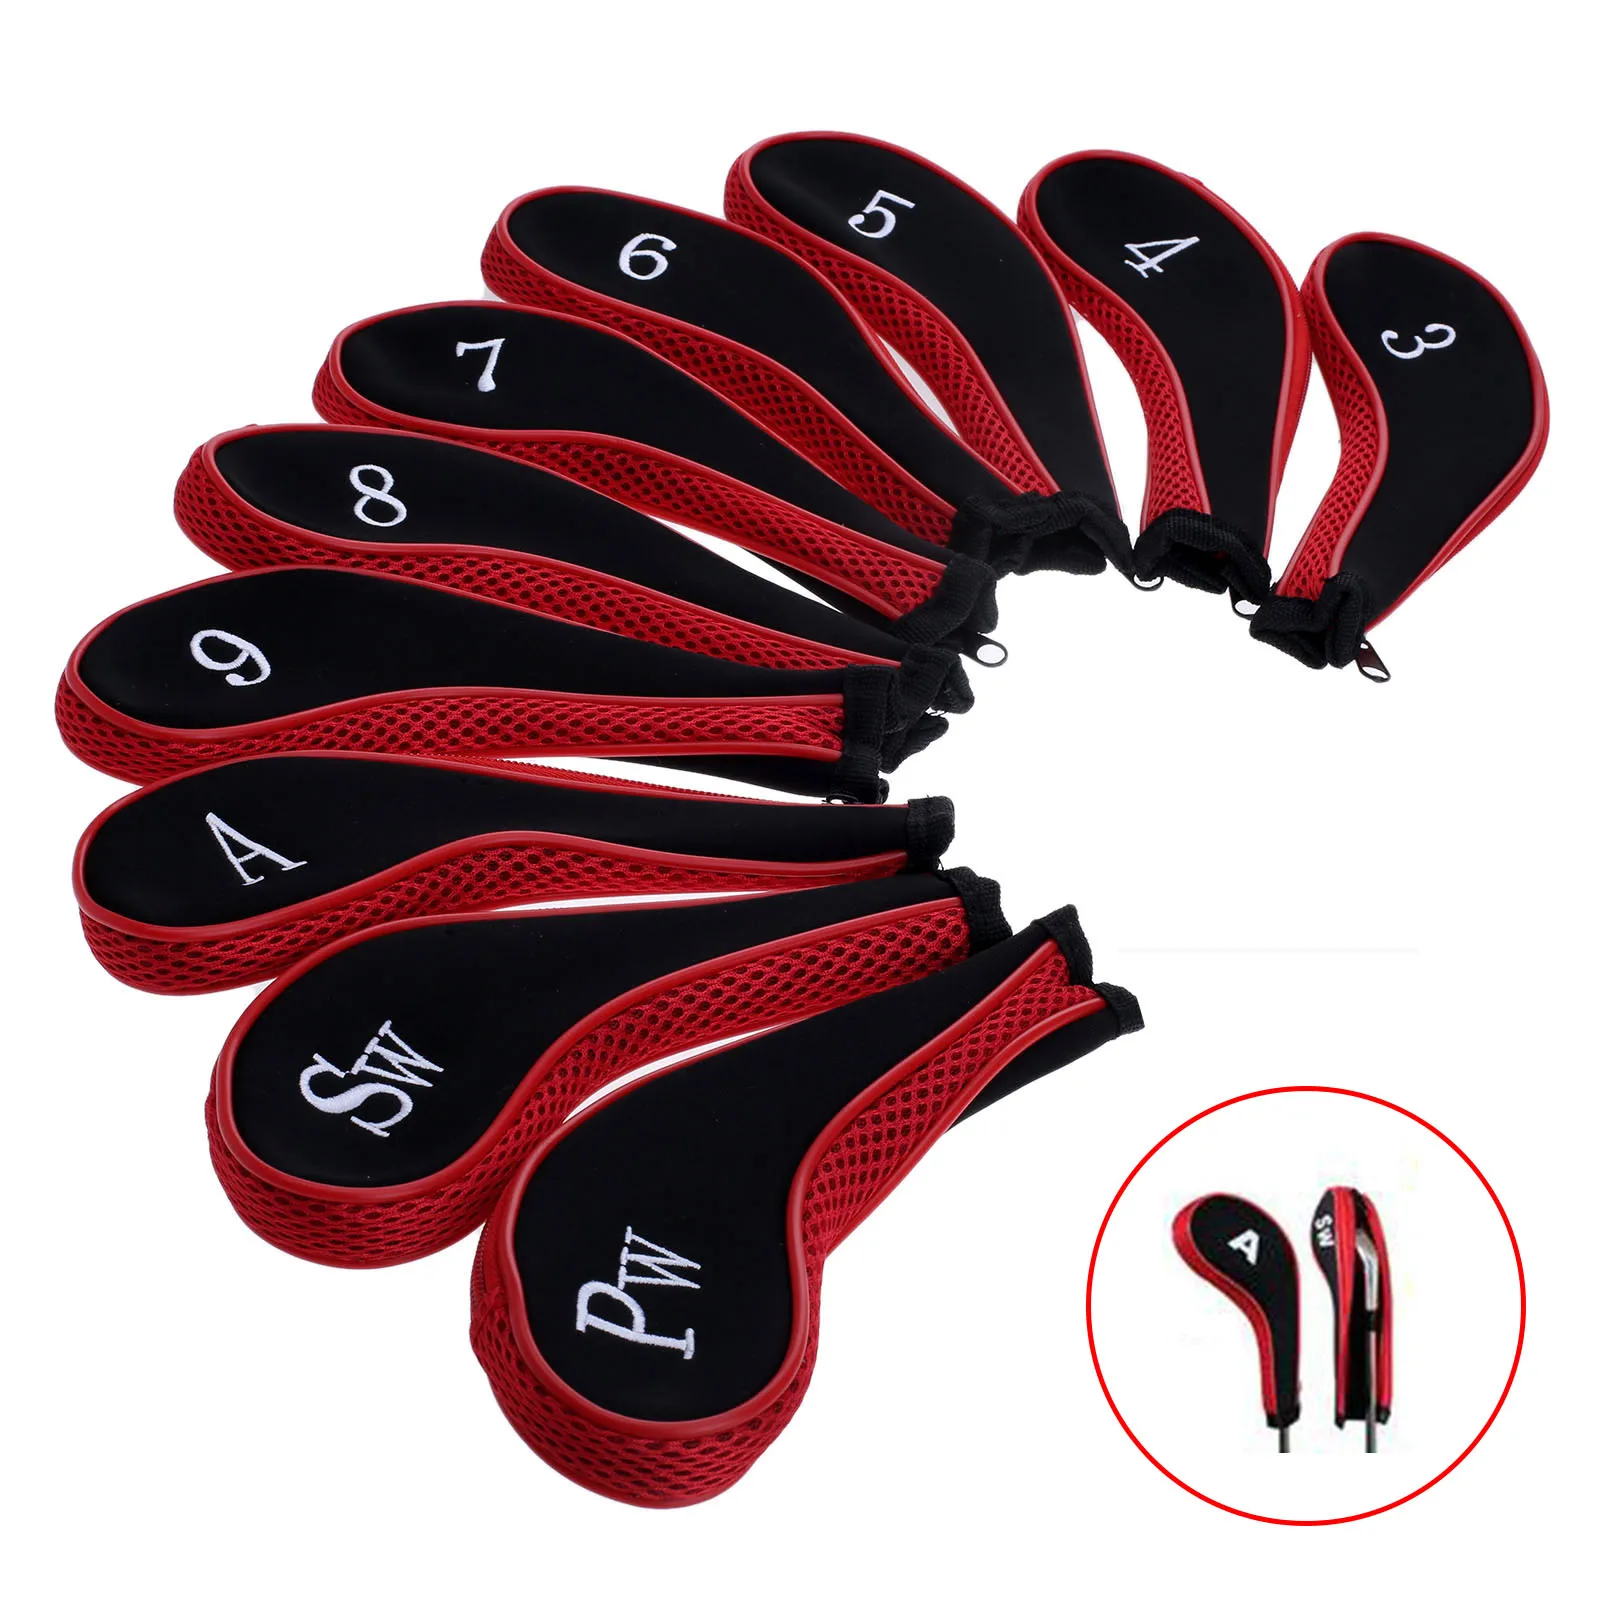 

10Pcs Cloth Golf Club Iron Putter Head Covers Golf Clubs Headcovers Protect Case Pocket Washable Sleeve Neoprene Head Accessorie